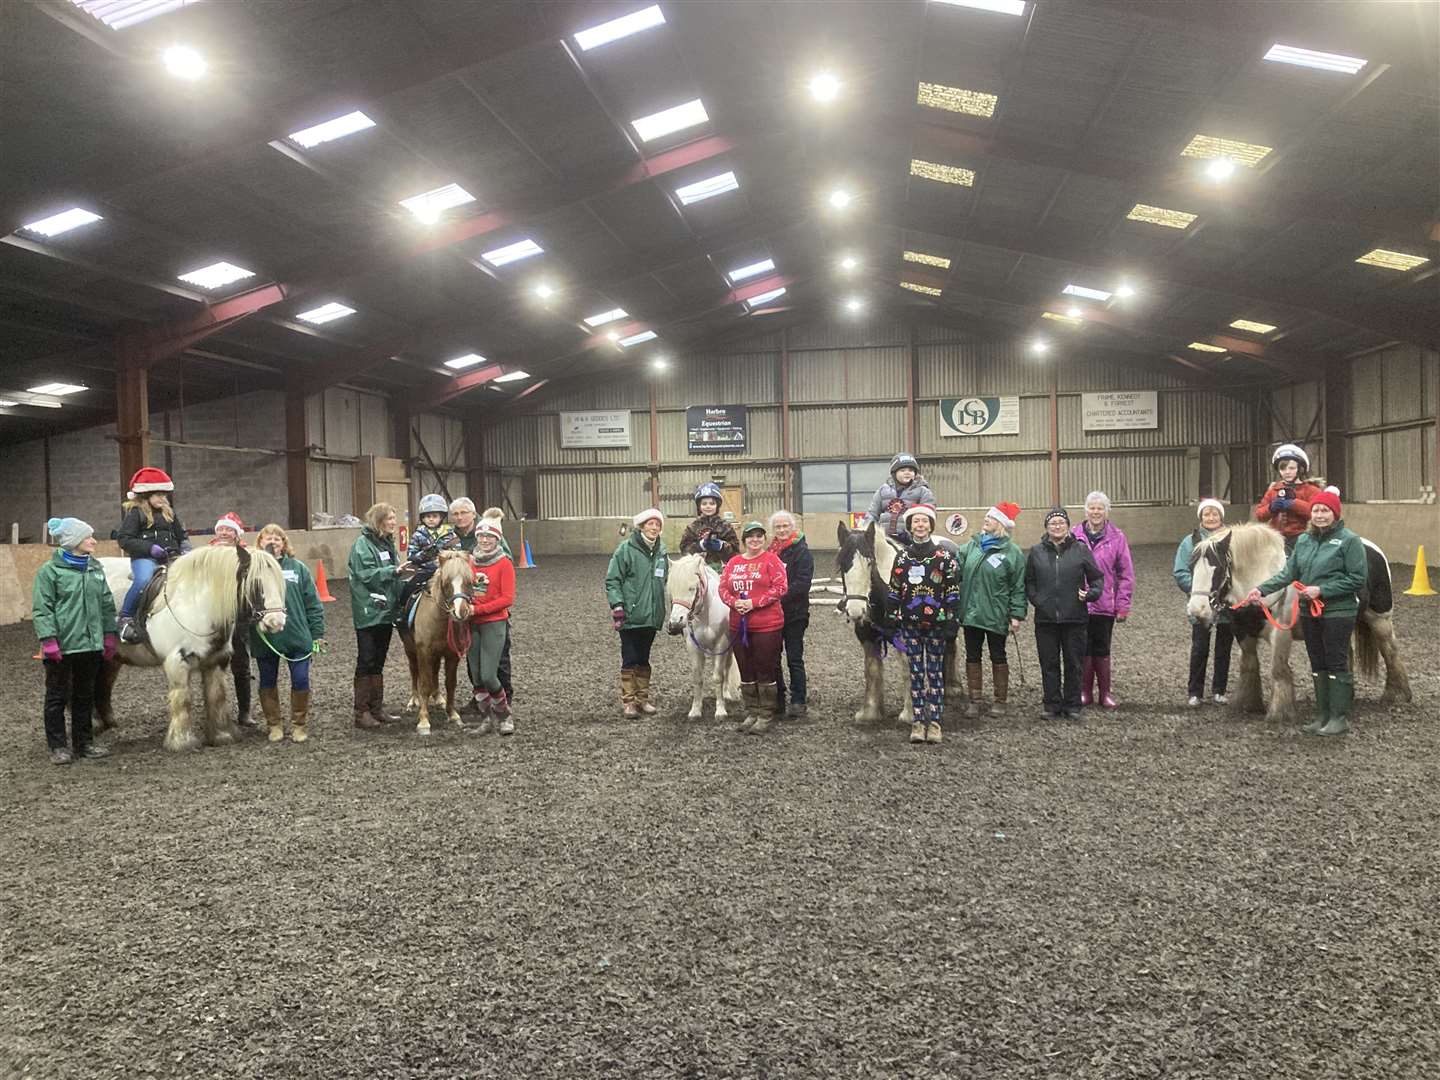 Ride 1 coach was Mary Elder and trophies and rosettes were handed over by Elaine Watson and Sally Thomson.